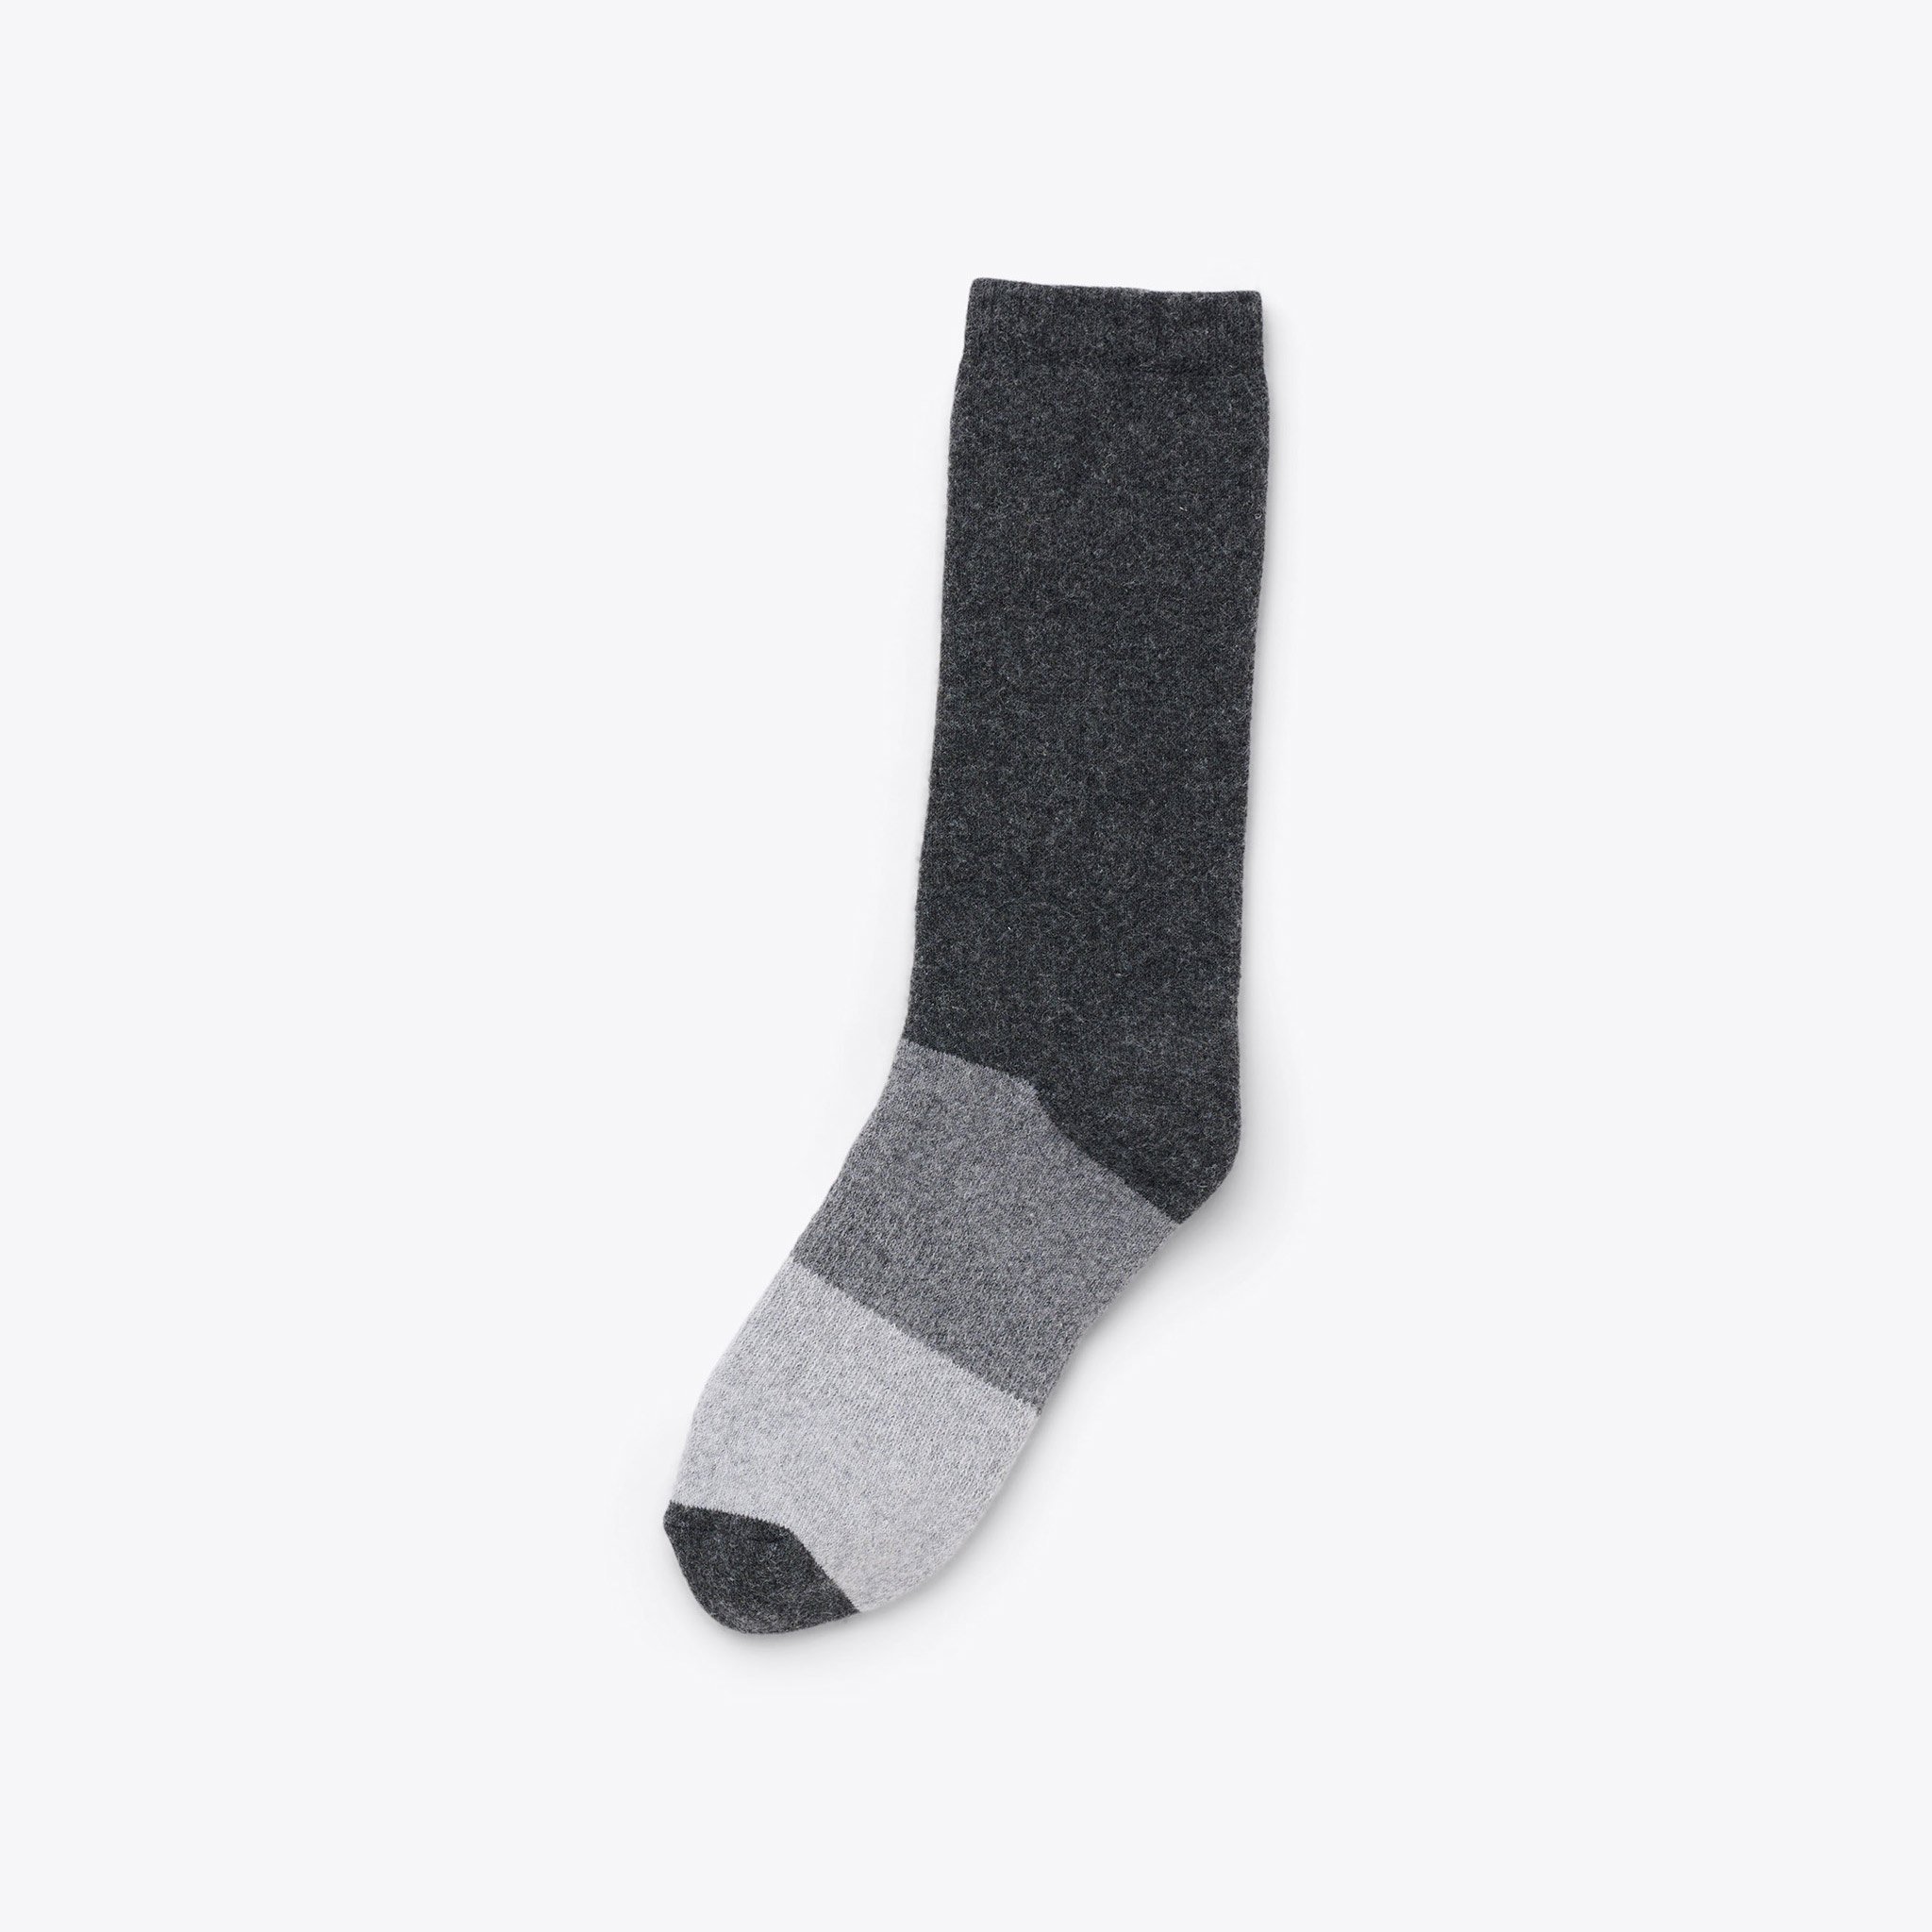 Nisolo Wool Cushion Crew Hiker Sock Charcoal Colorblock - Every Nisolo product is built on the foundation of comfort, function, and design. 